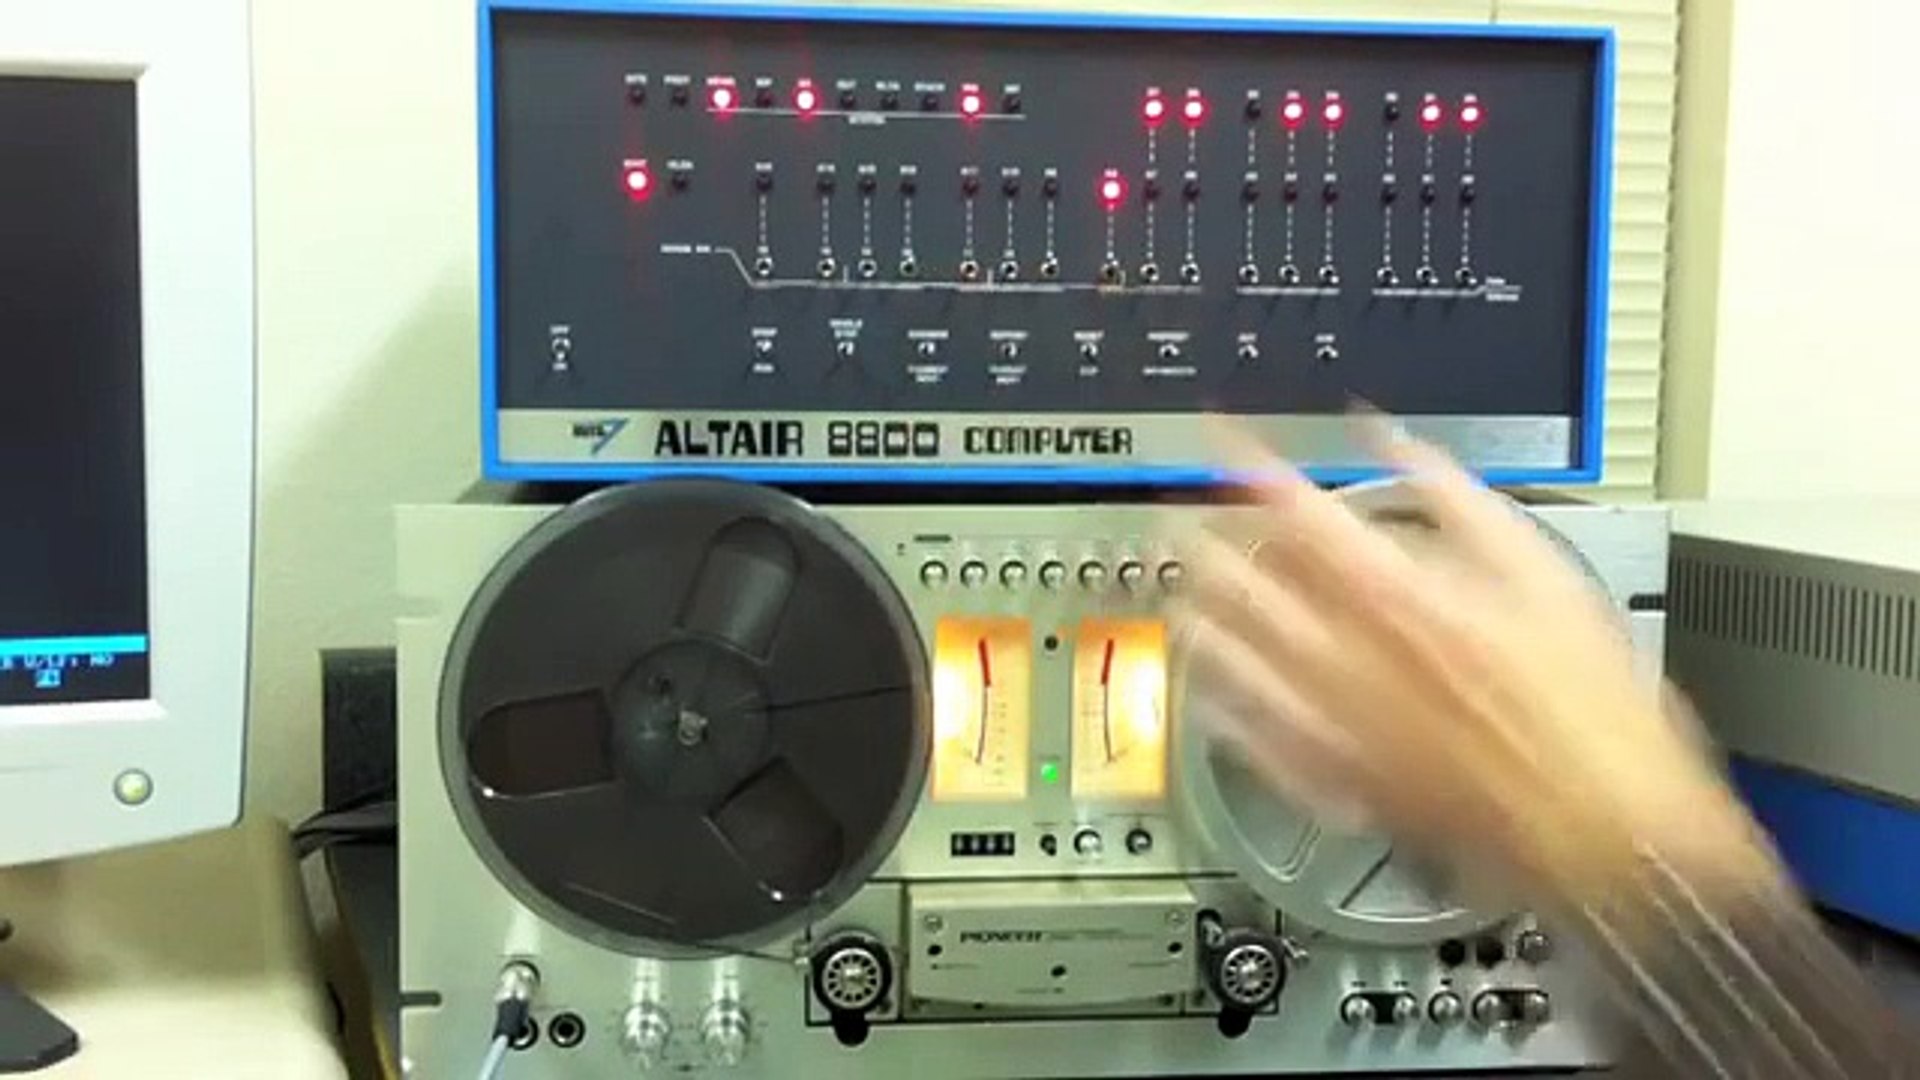 Altair 8800 - Video #9.2 - Loading 8K BASIC the Fun Way